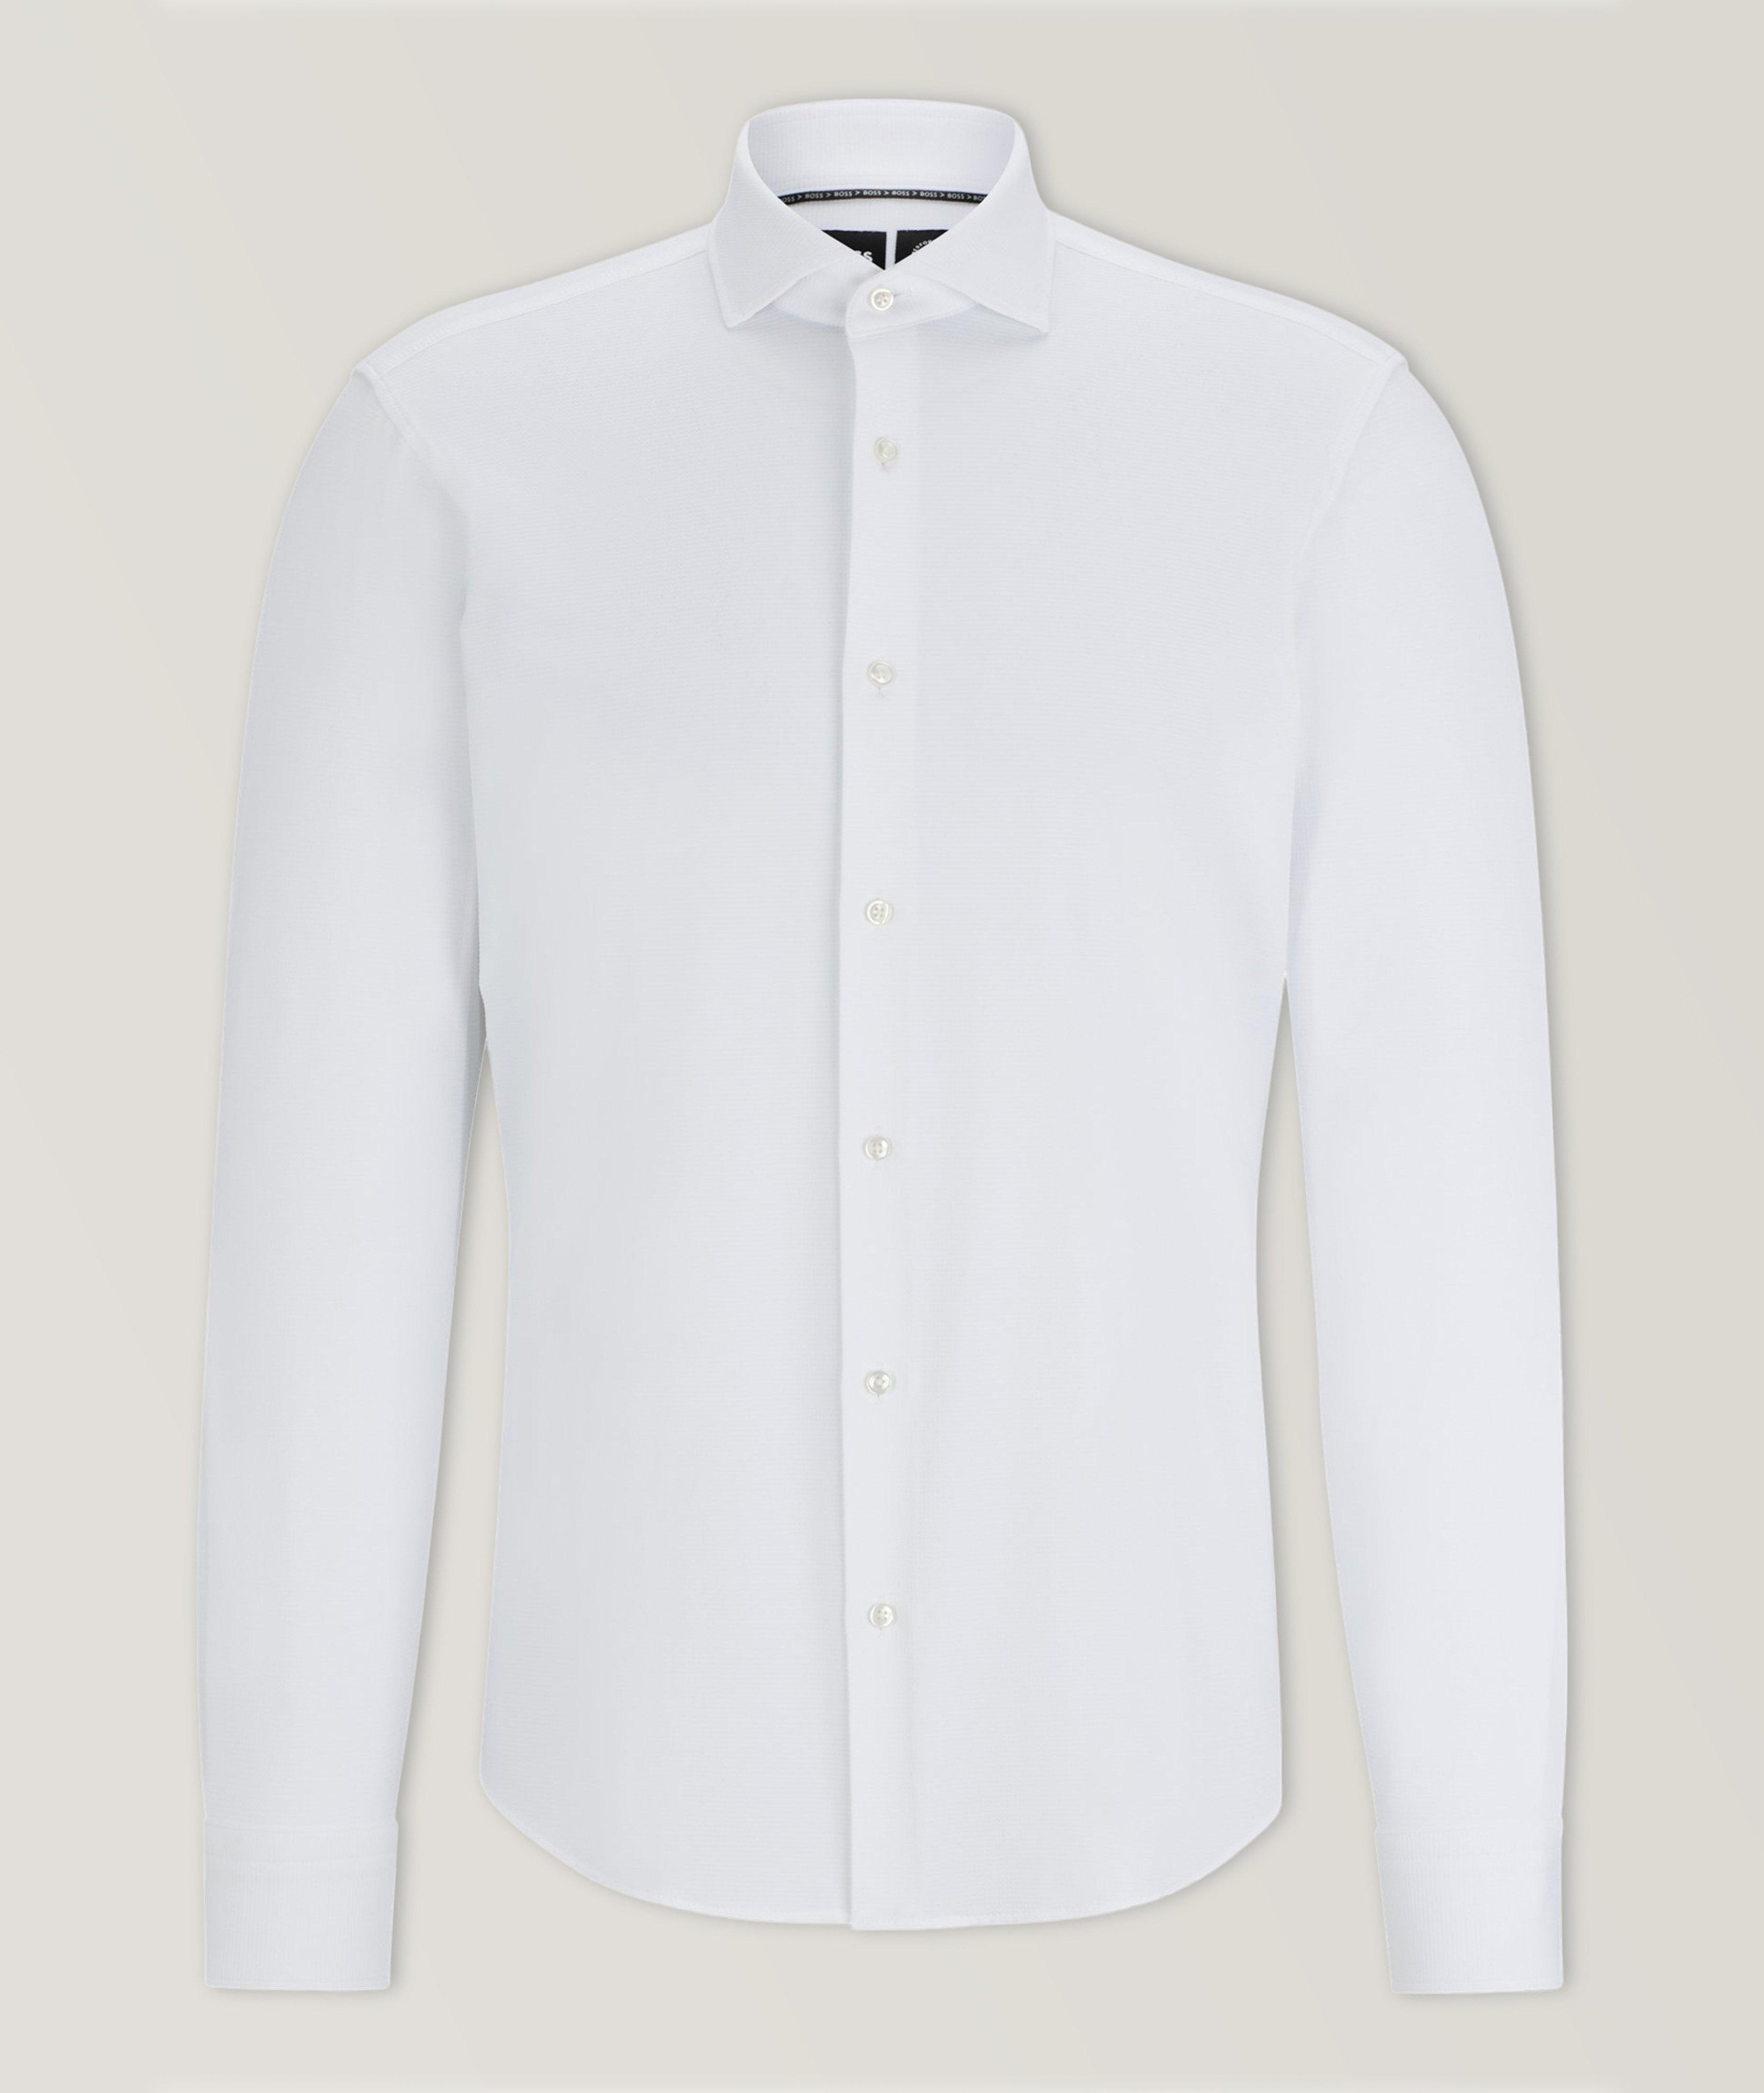 Structured Stretch-Fabric Dress Shirt image 0